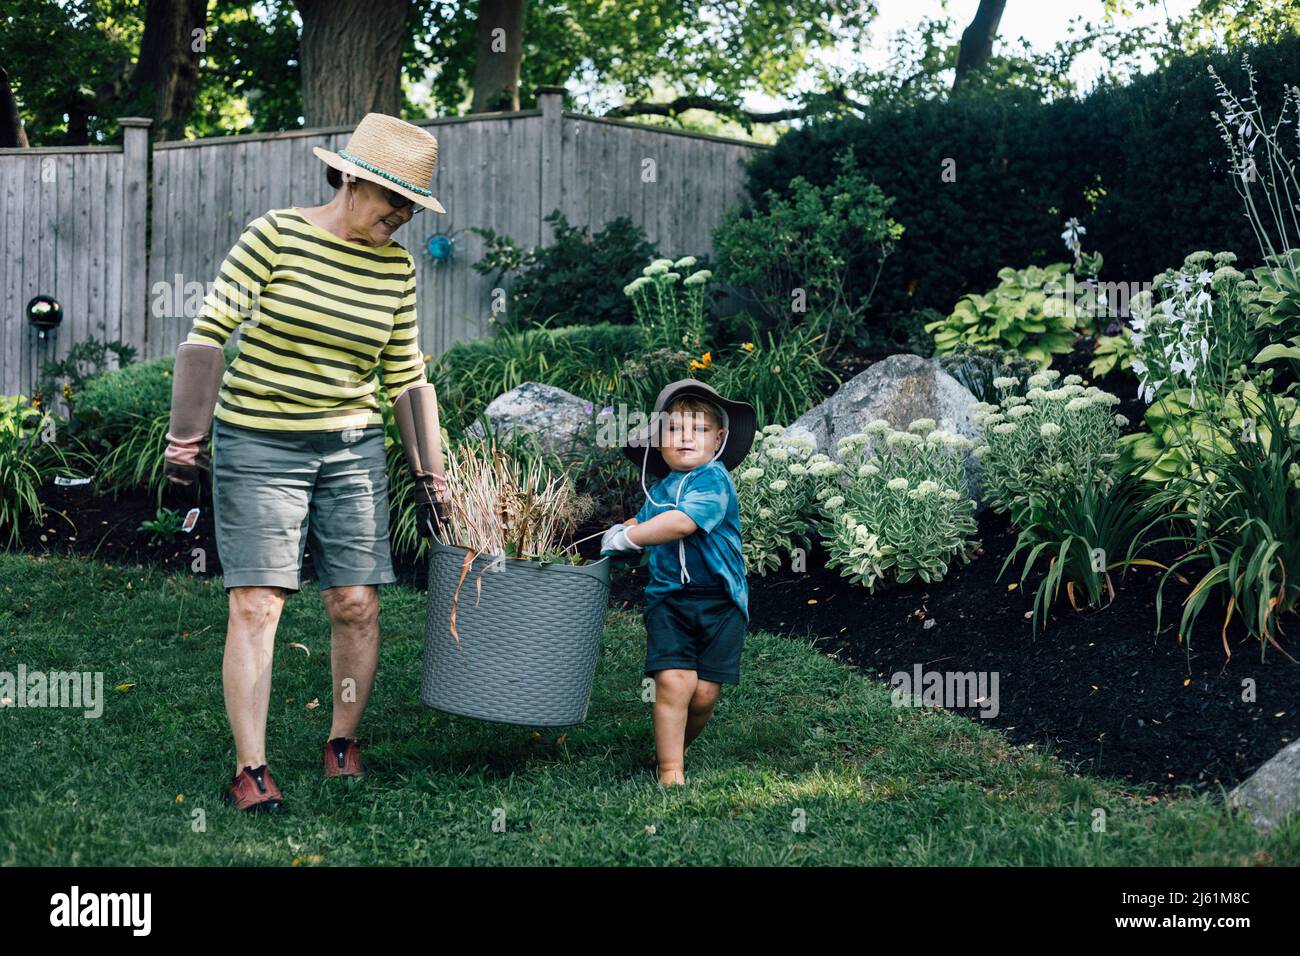 Grandmother with grandson carrying basket of plant together in garden Stock Photo